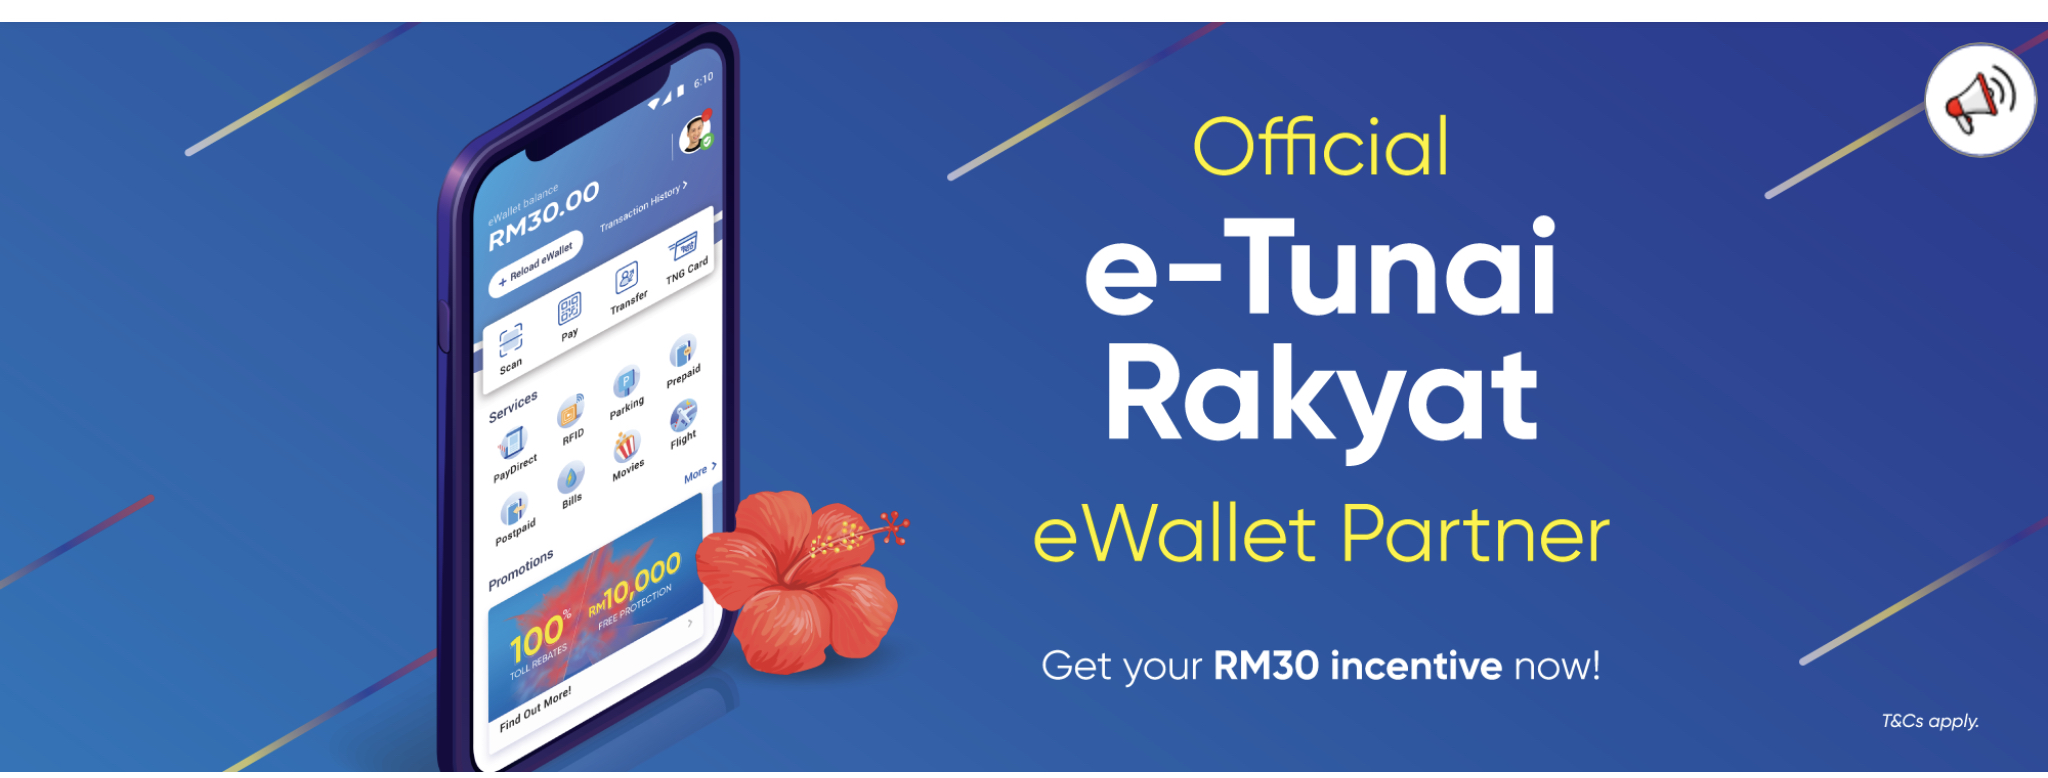 GrabPay, Touch’ n Go, and Boost selected for Malaysian digital money initiative